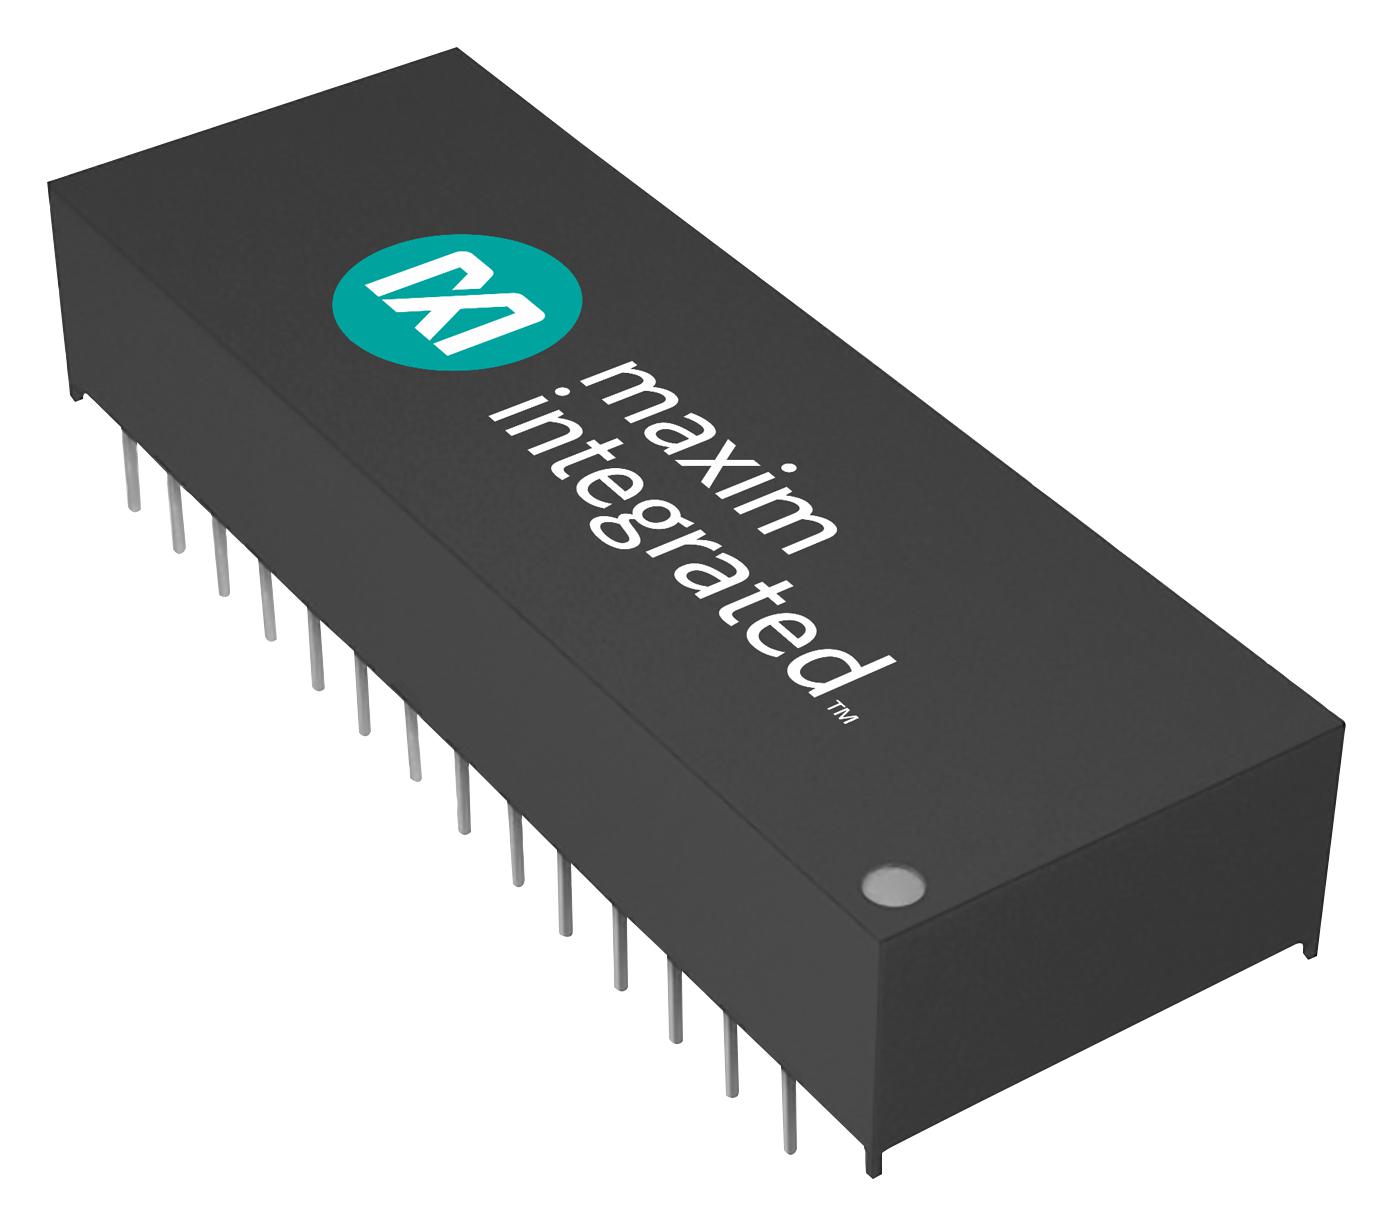 DS1245Y-70IND+ NON-VOLATILE SRAM, 1MBIT, 70NS, EDIP-32 MAXIM INTEGRATED / ANALOG DEVICES